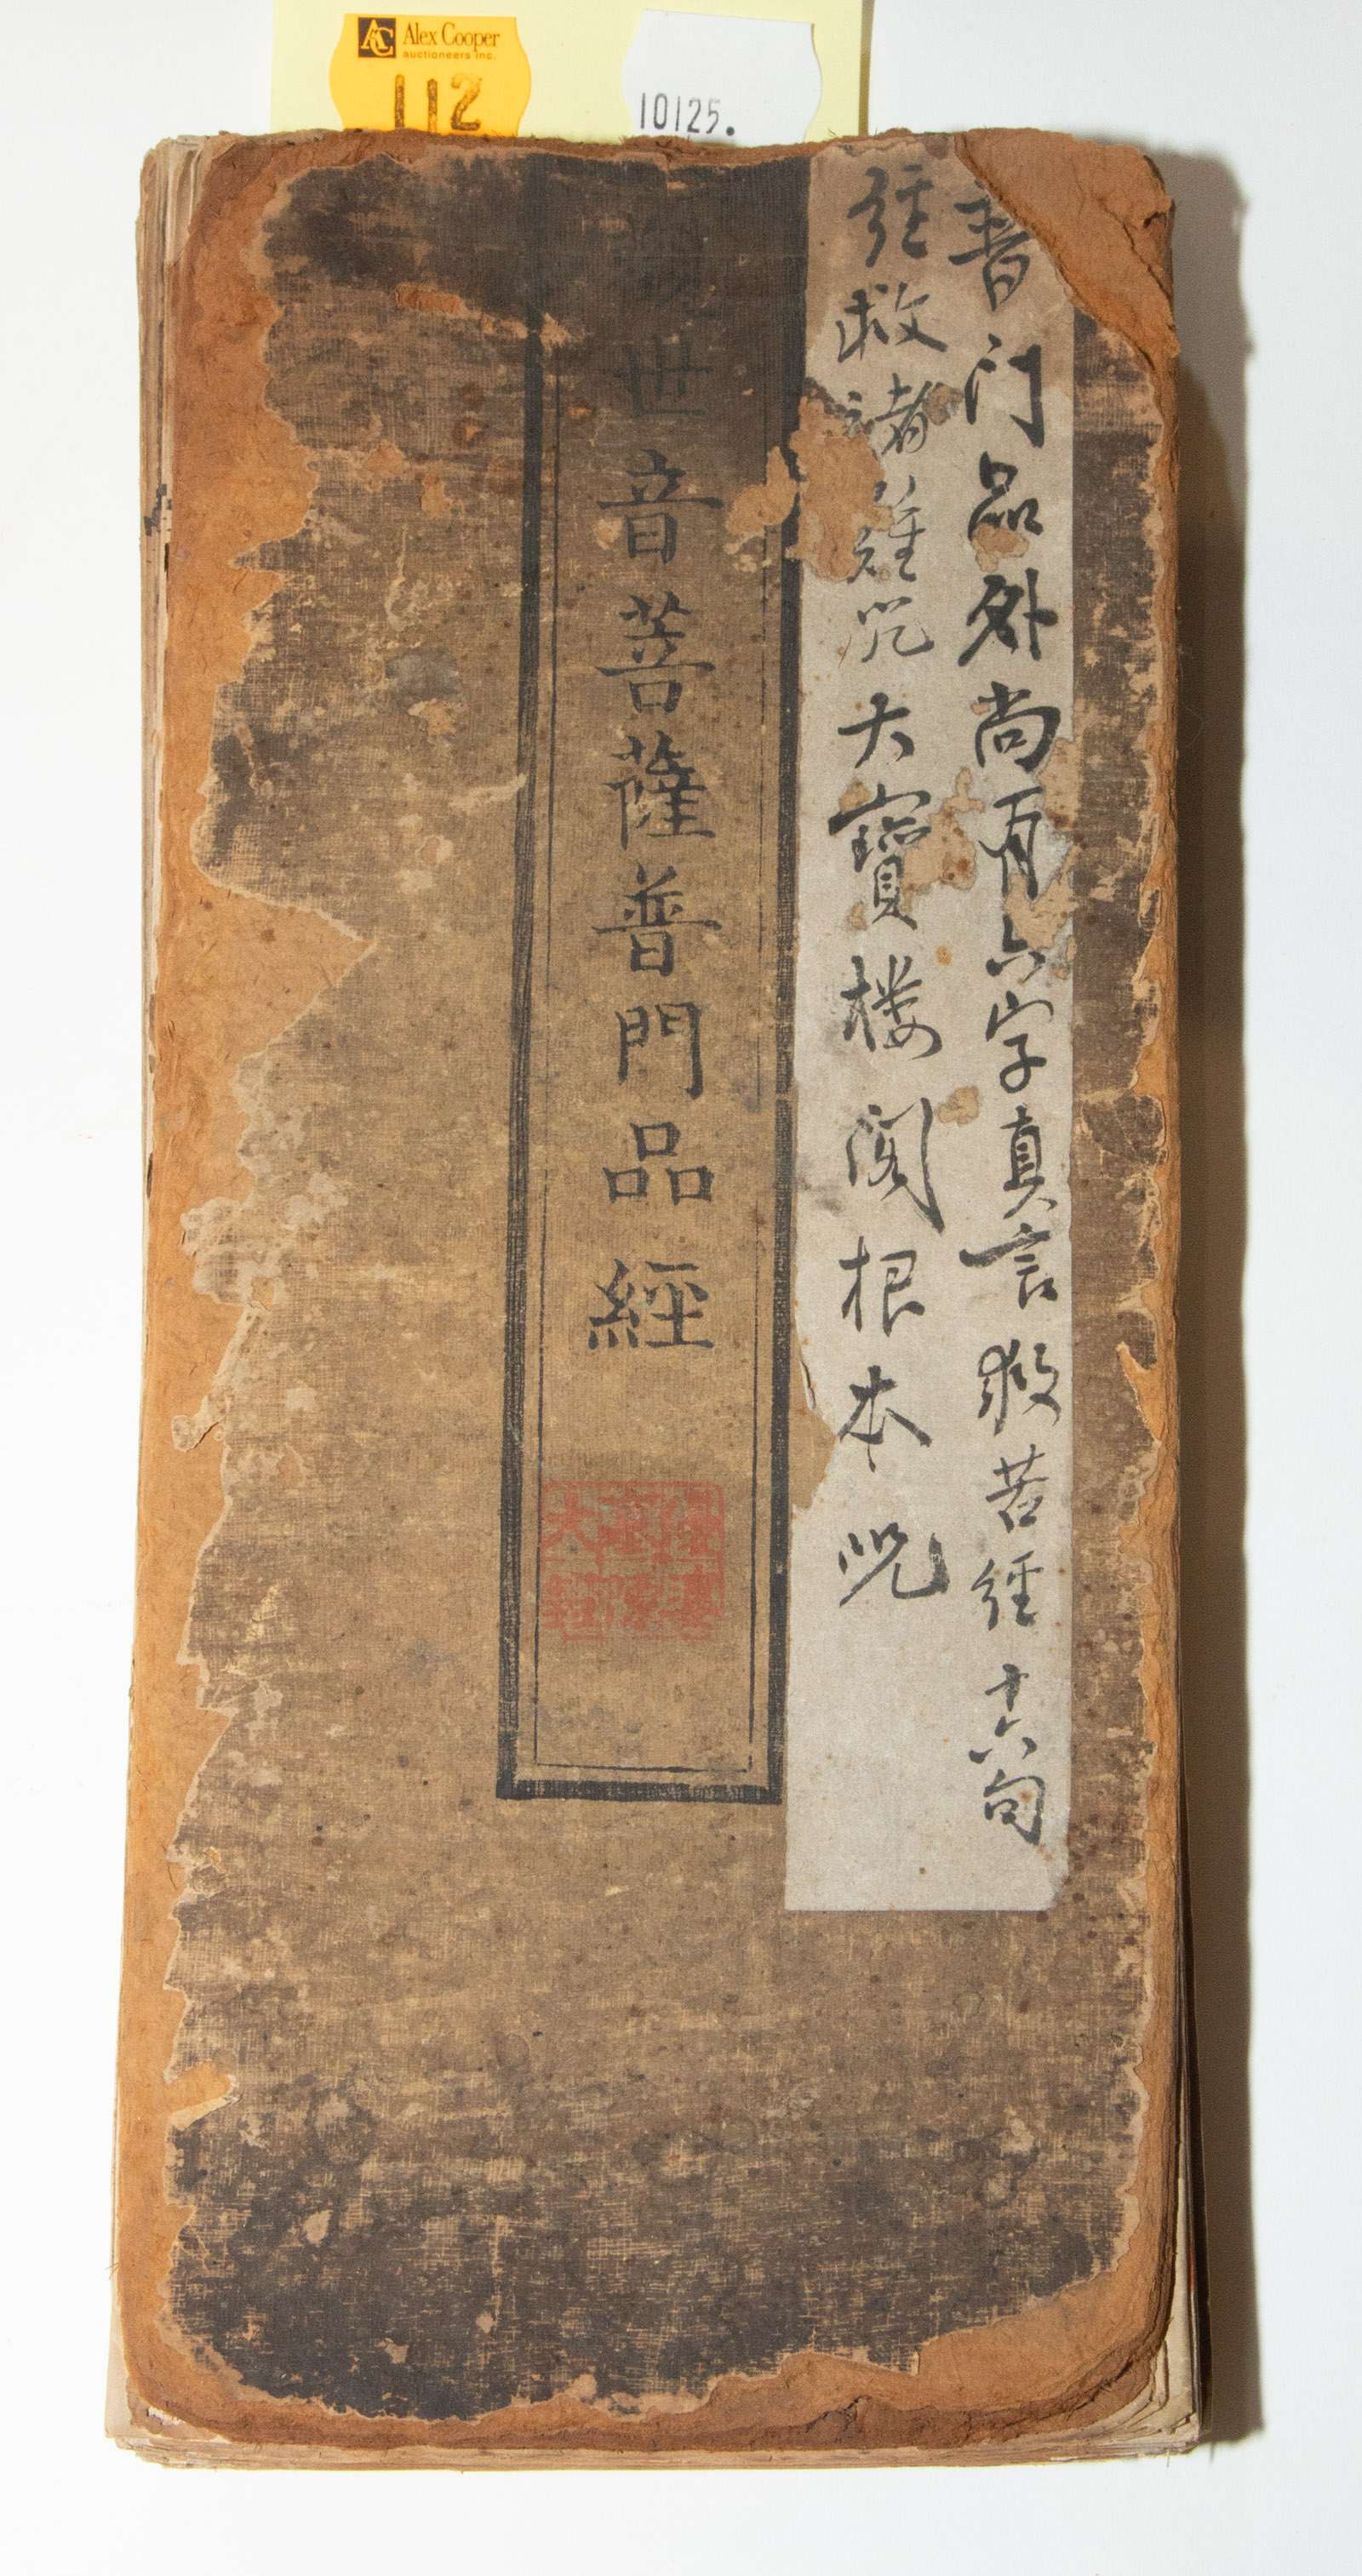 RARE CHINESE XYLOGRAPHIC BOOK,